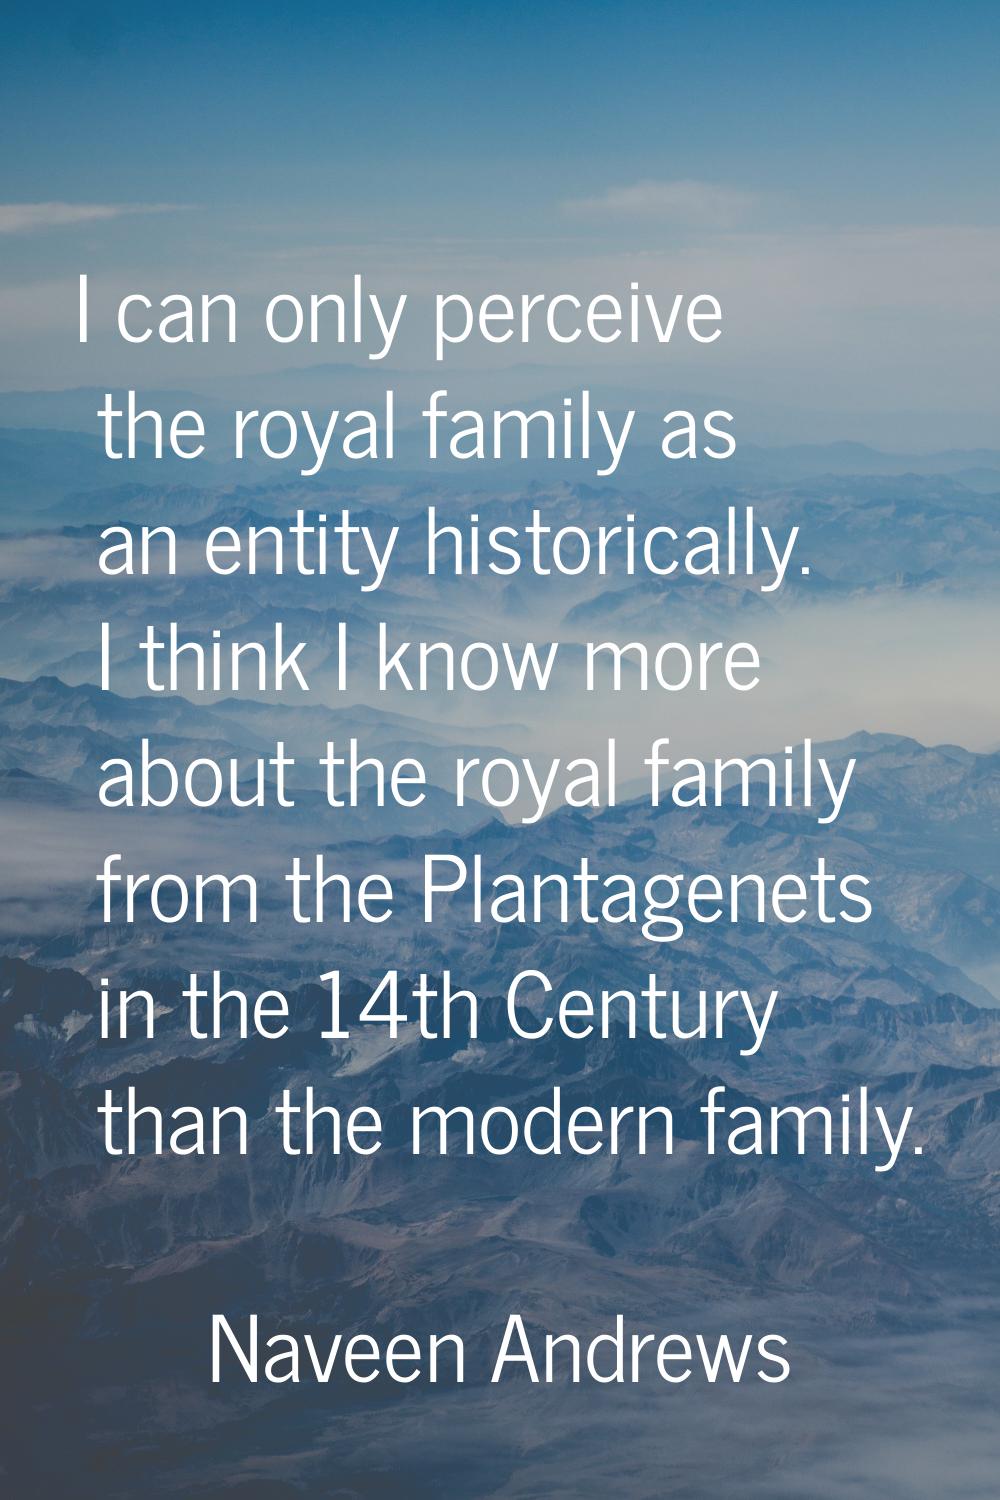 I can only perceive the royal family as an entity historically. I think I know more about the royal